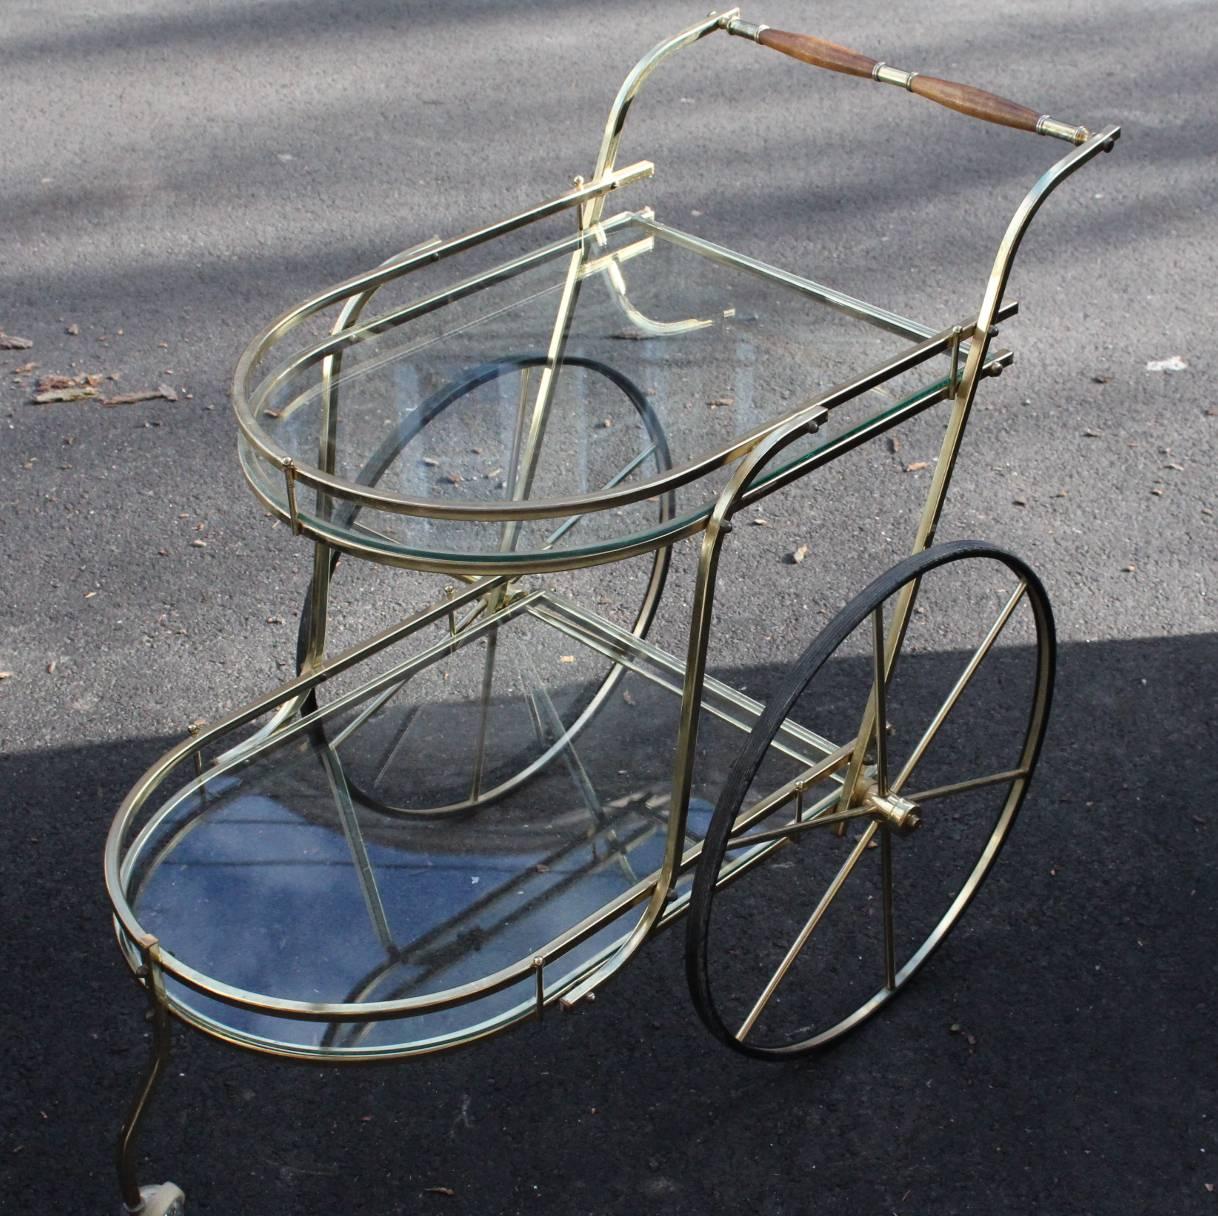 Hollywood Regency Italian two-tier bar cart or tea trolley in polished brass and glass dating from circa 1950. The cart features glass tiers with galleries, two large spoke wheels and a front caster wheel. The cart is in good vintage condition and